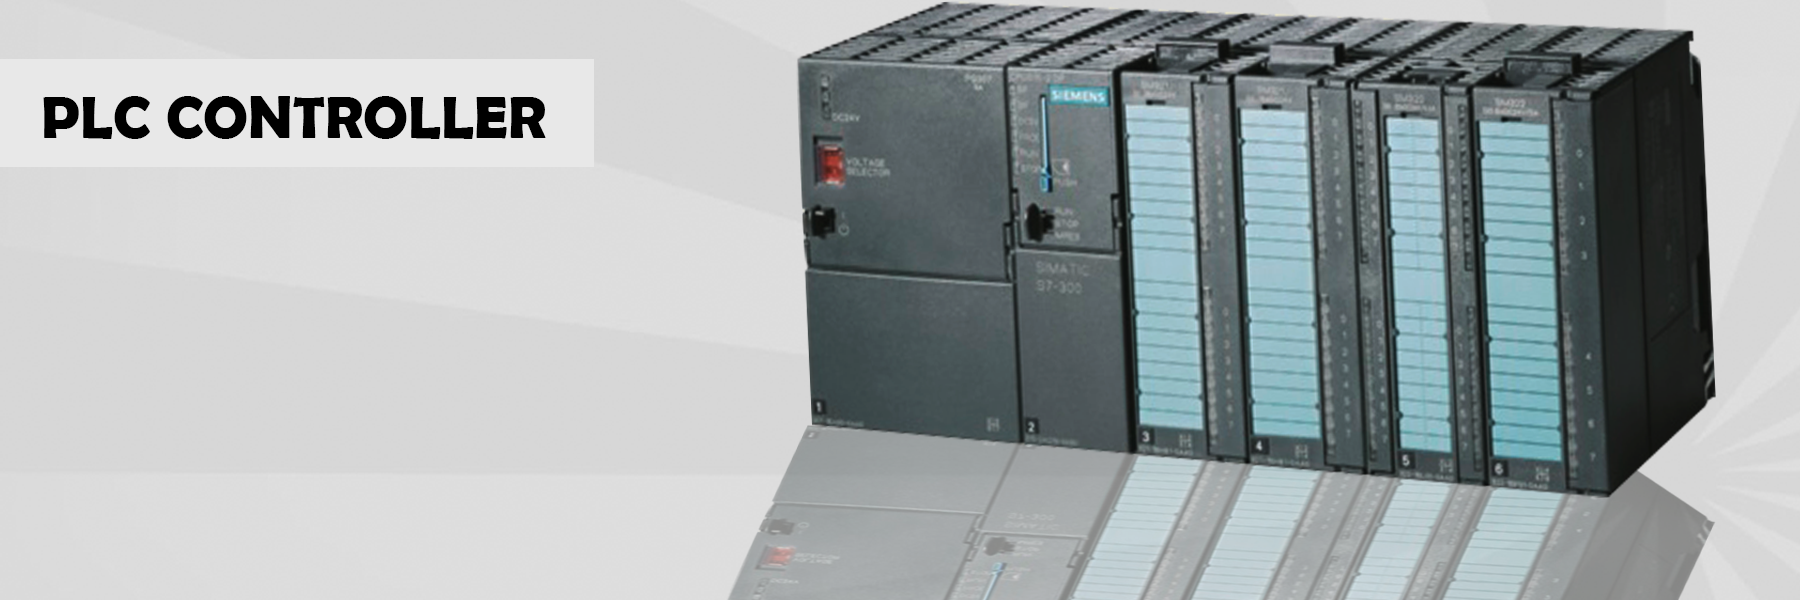 Siemens Plc Trading And Repairing In India